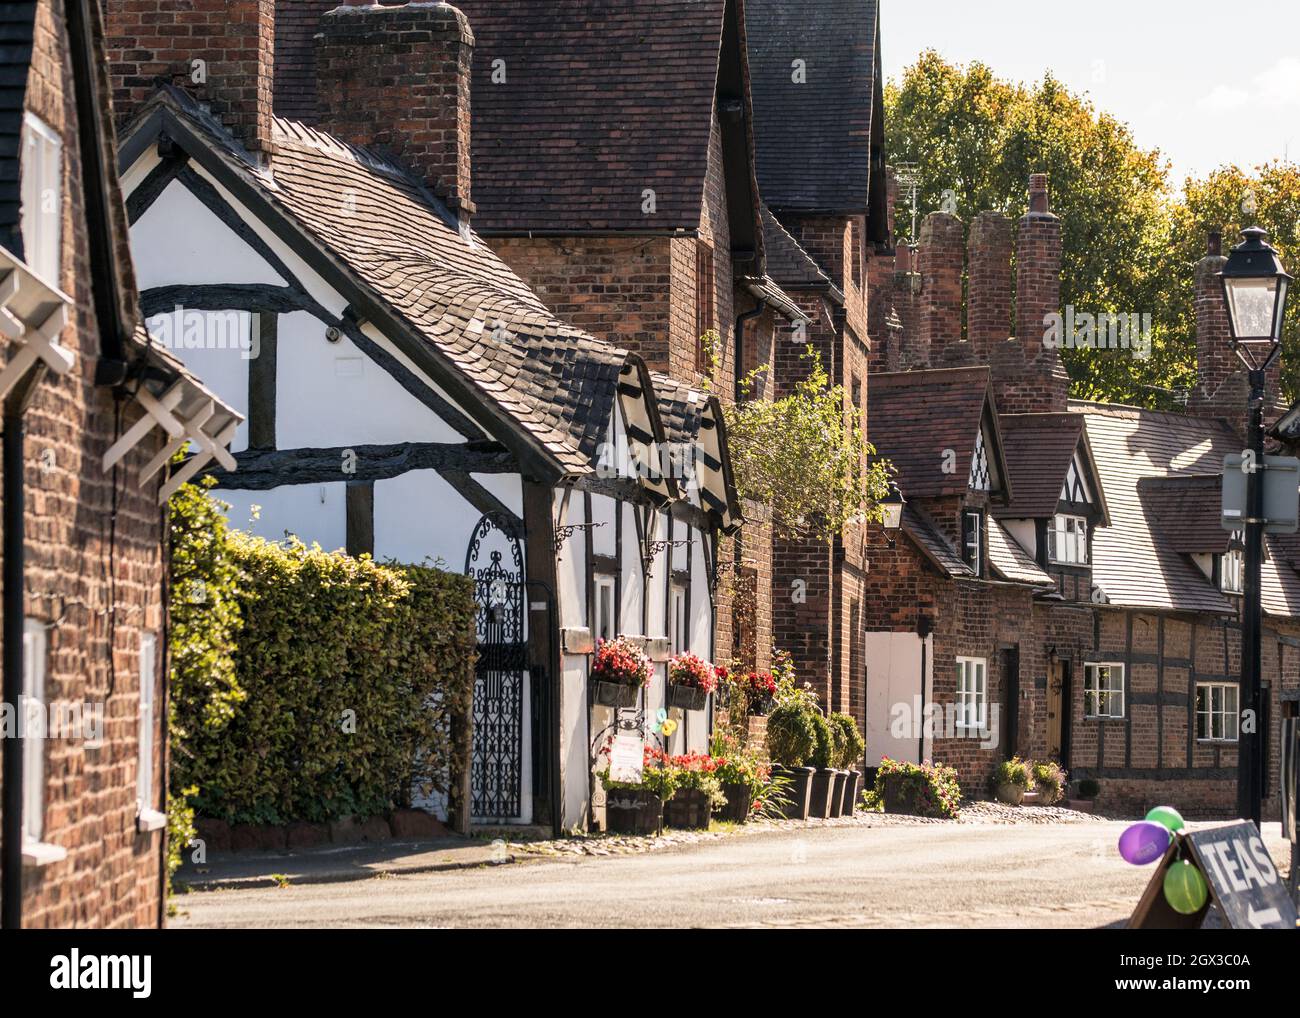 Street By Buildings In A Quaint English Village Stock Photo